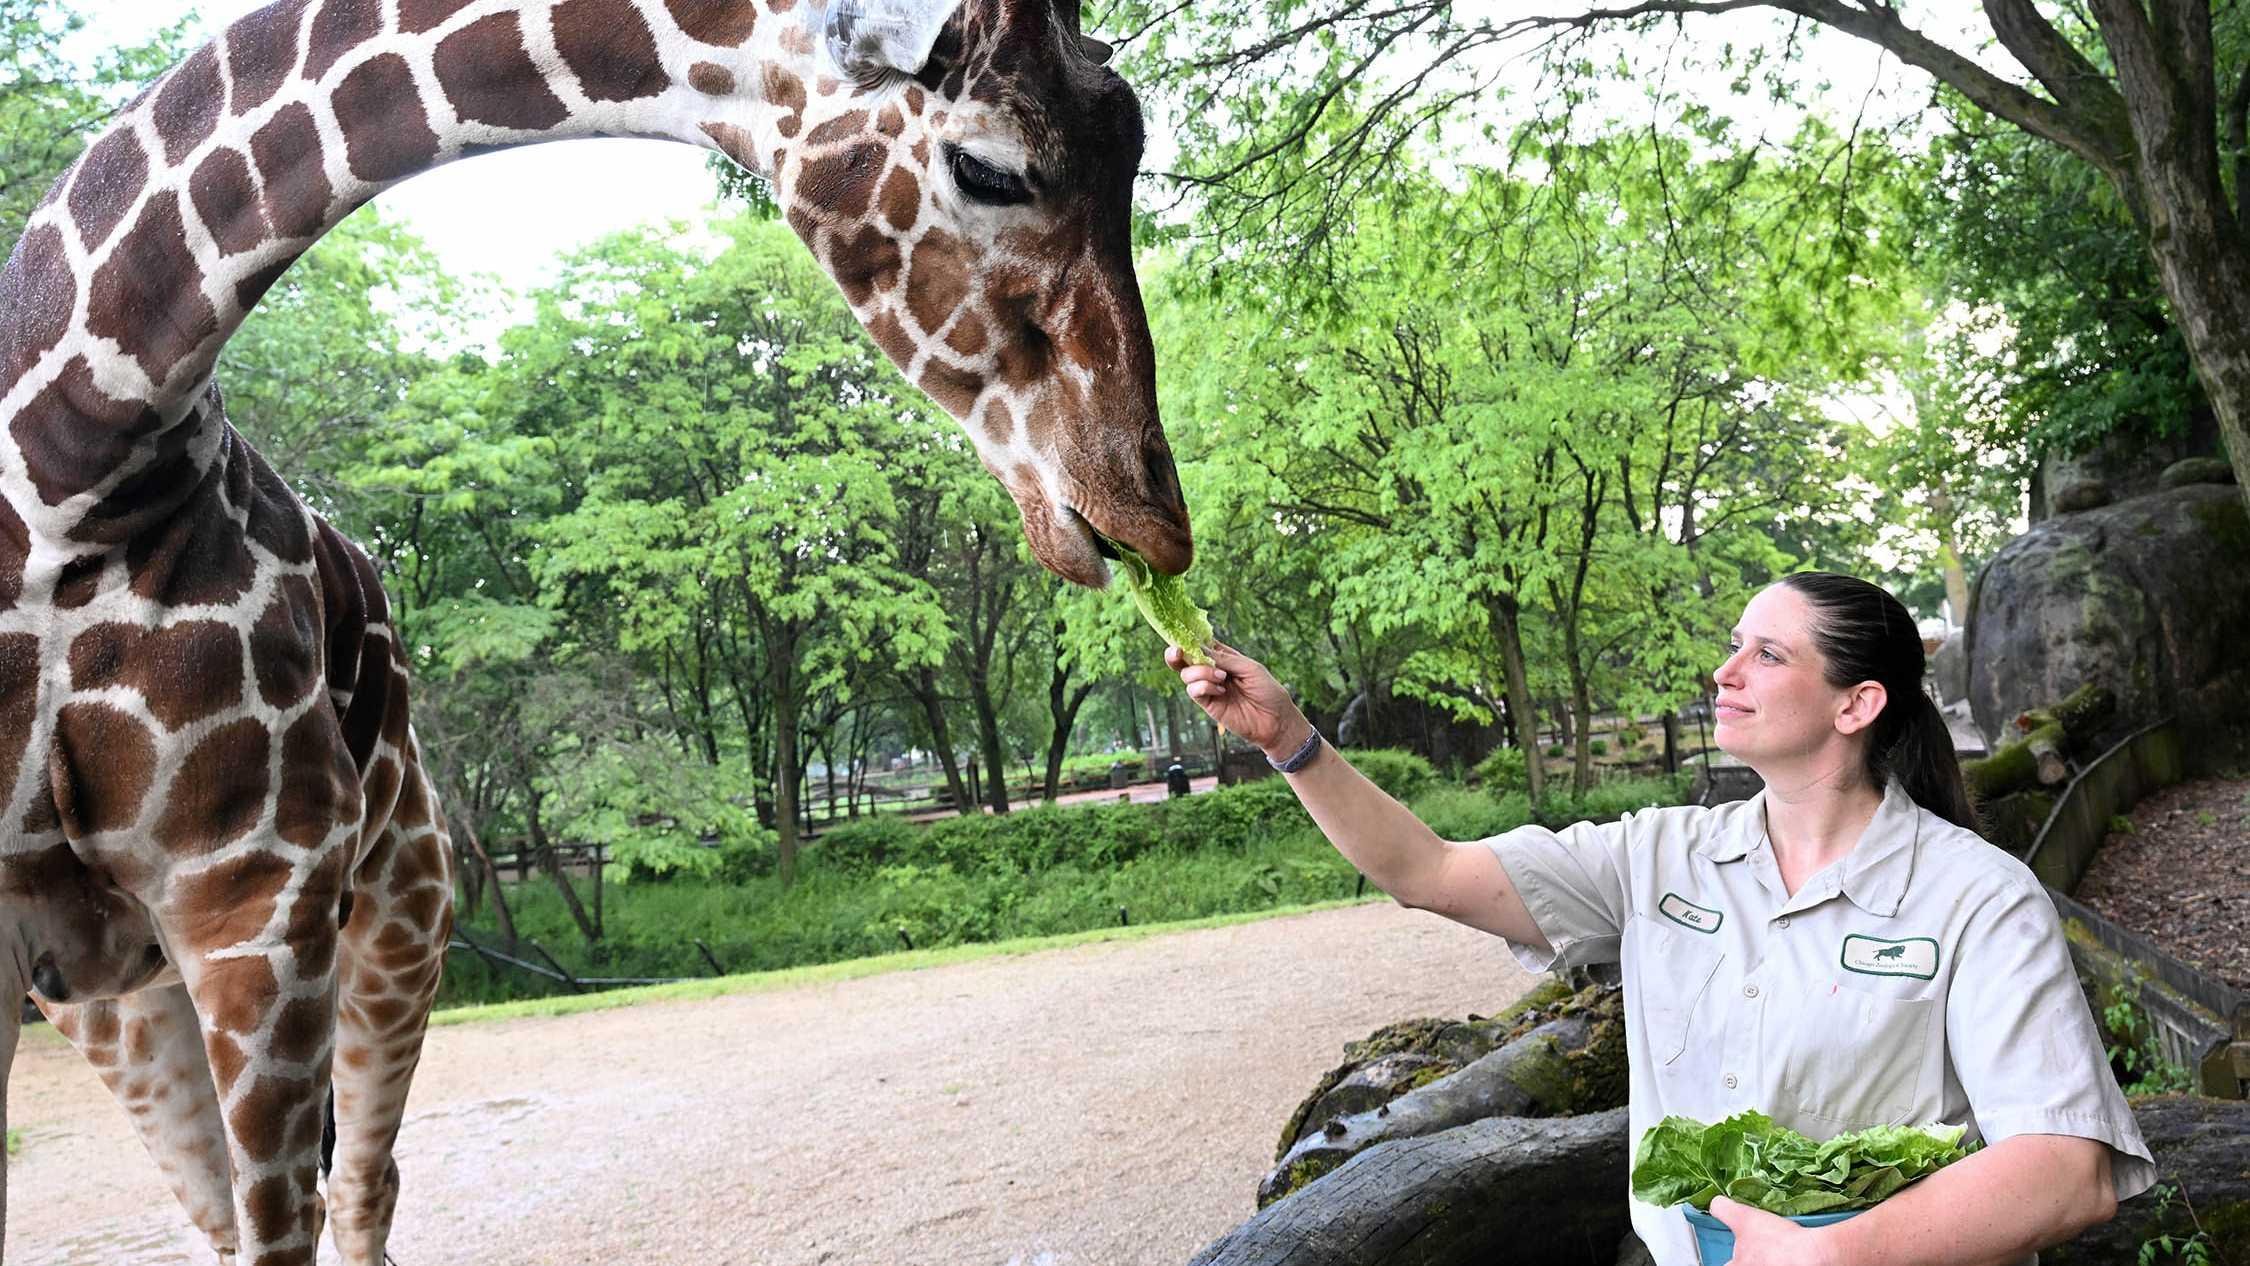 Kate Jungiewicz, an animal care specialist at Brookfield Zoo, feeds Arnieta, a pregnant 16-year-old reticulated giraffe, prophylactic antibiotics hidden between leaf lettuce. (Jim Schulz / CZS-Brookfield Zoo)